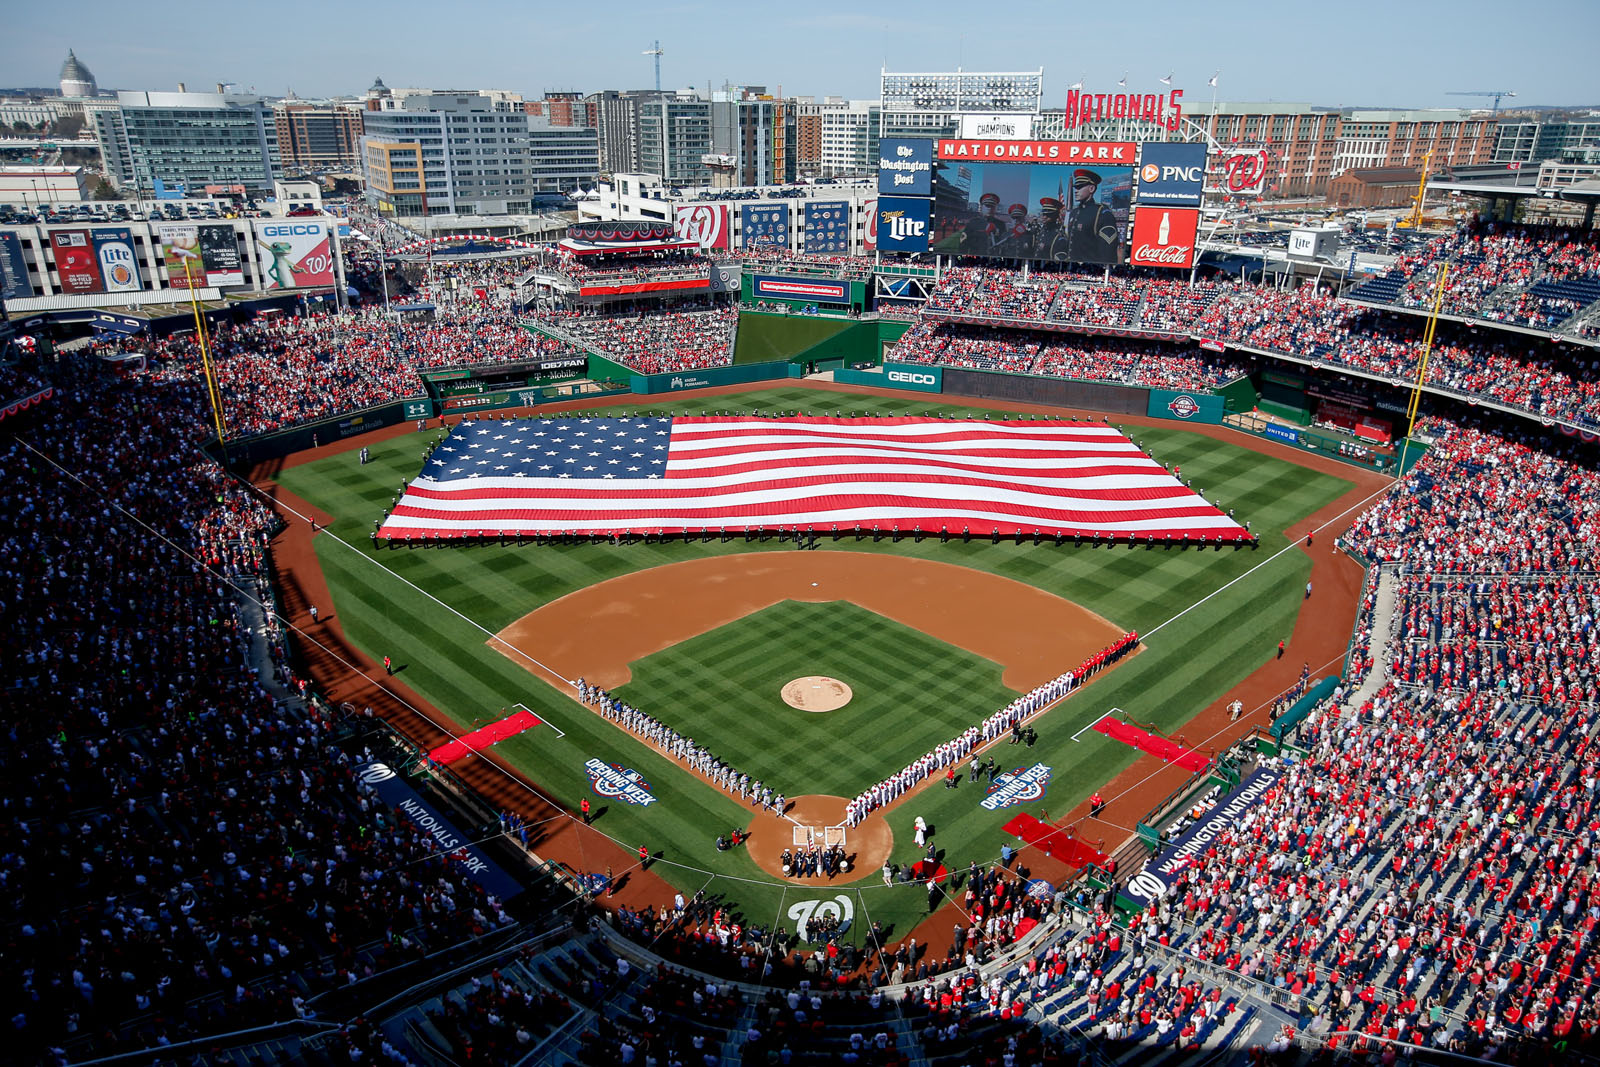 A large American flag is unfurled on the field before a baseball game between the Washington Nationals and the New York Mets on opening day at at Nationals Park, Monday, April 6, 2015, in Washington. (AP Photo/Andrew Harnik)